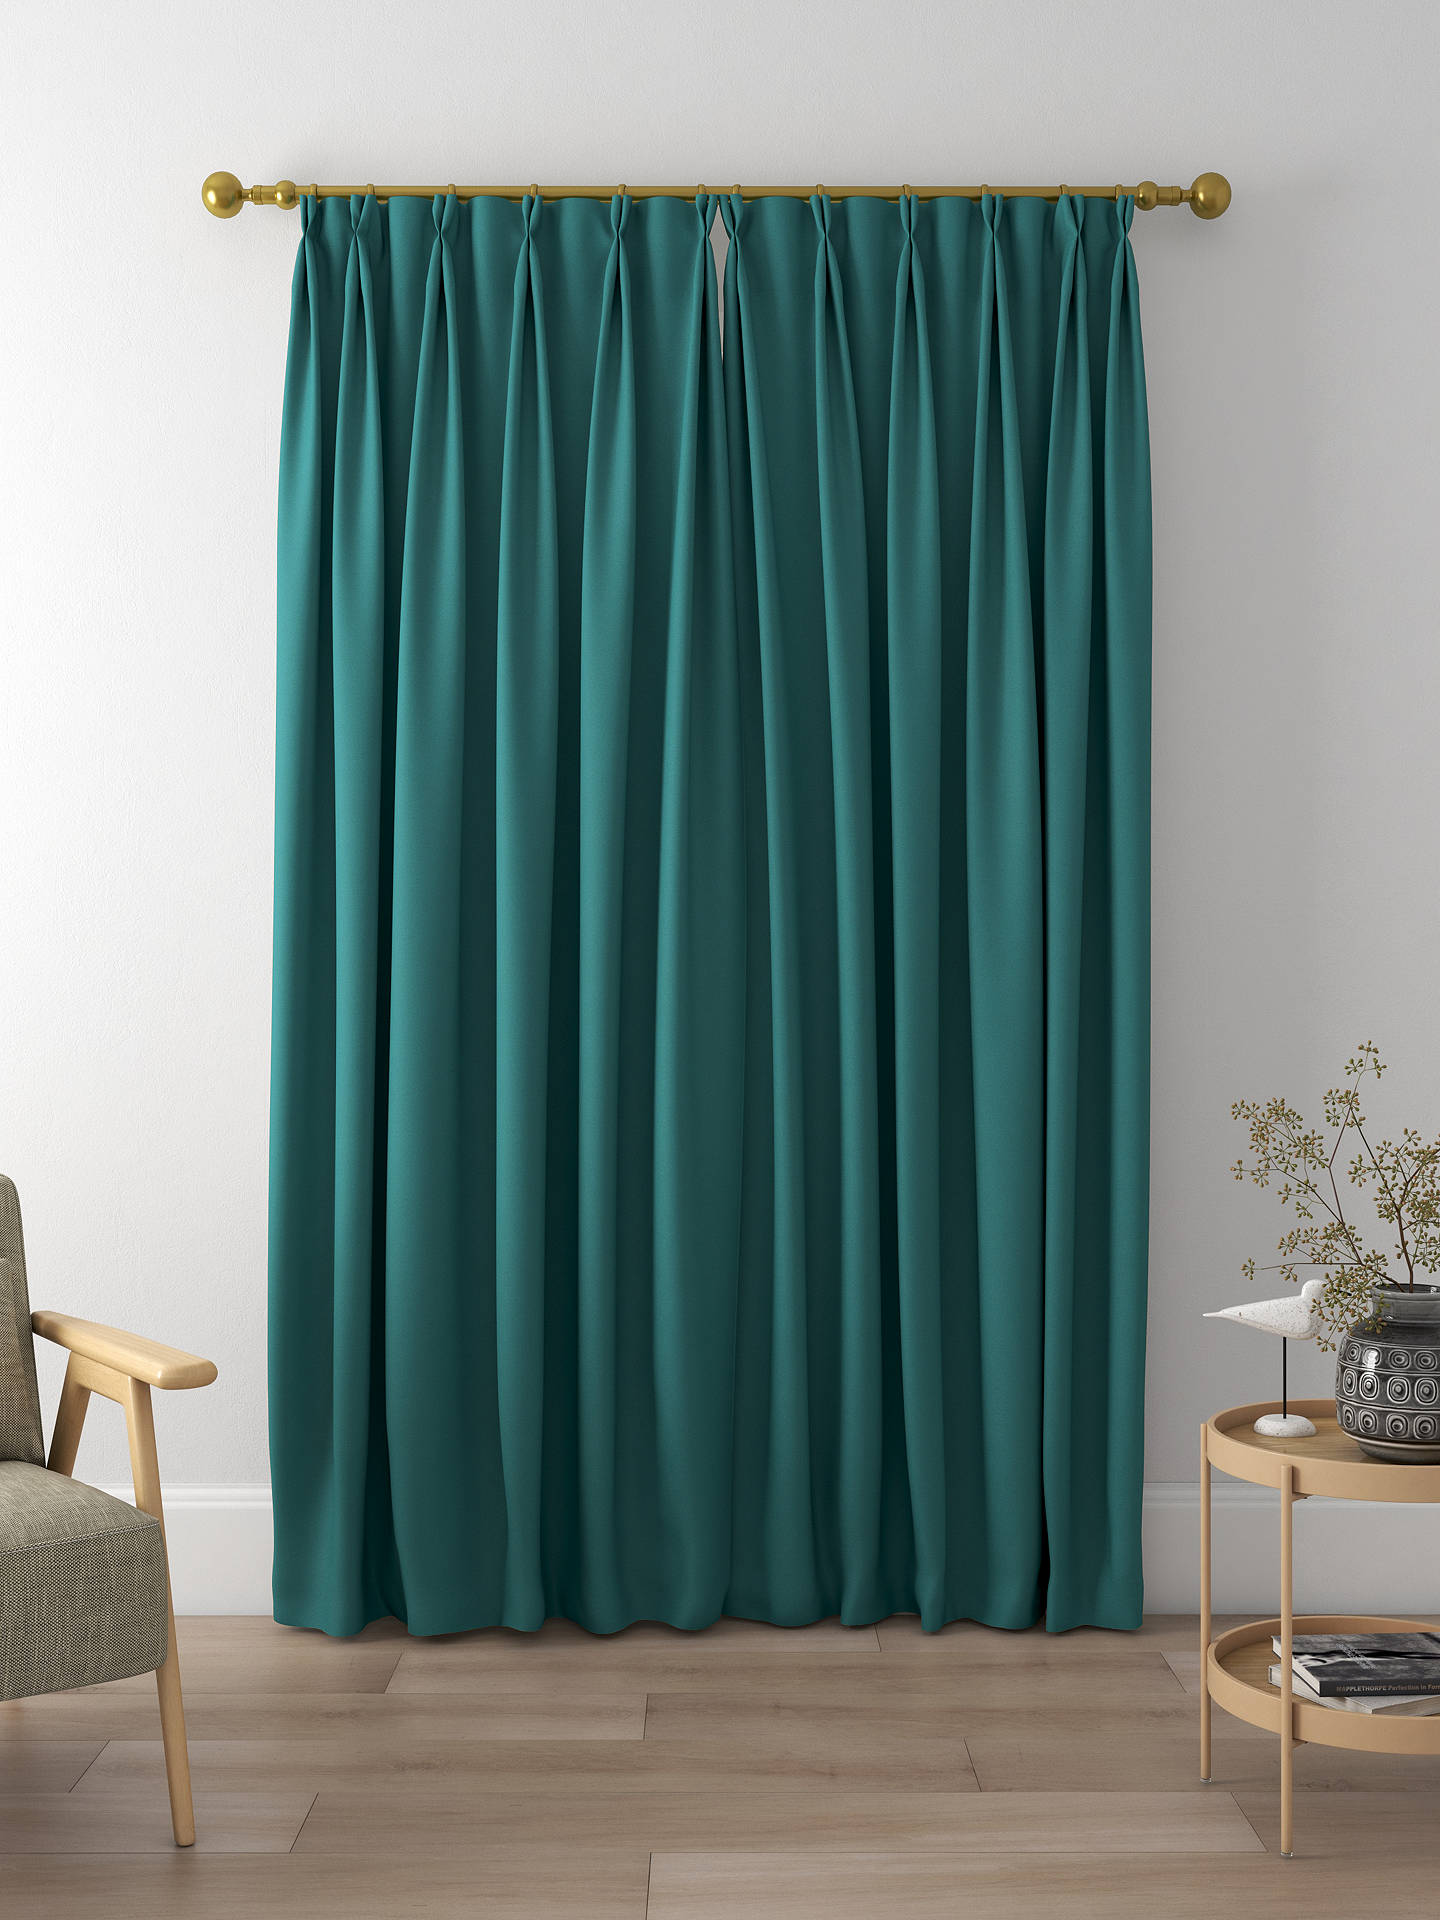 Harlequin Empower Plain Made to Measure Curtains, Kingfisher